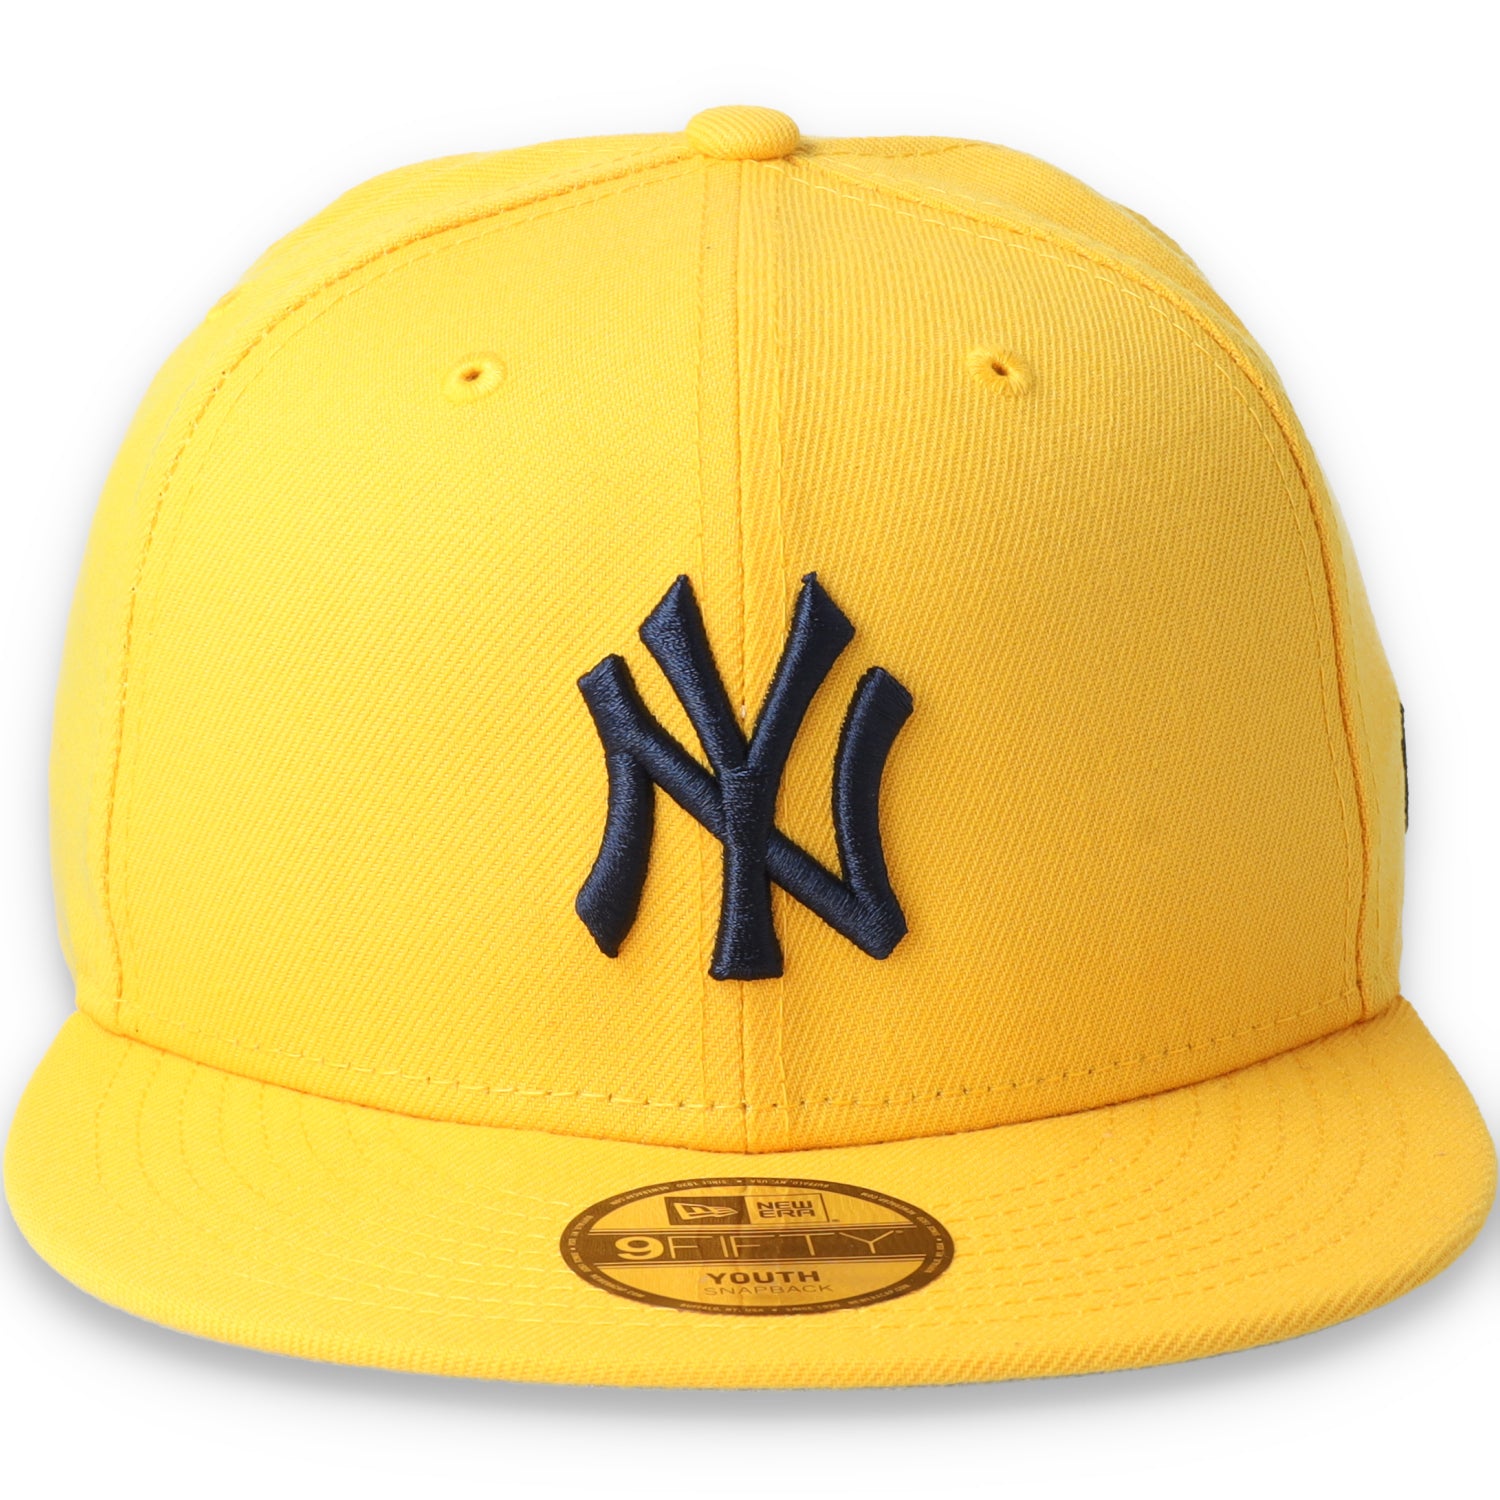 New Era Youth New York Yankees Color Pack 9FIFTY Snapback Hat-Yellow